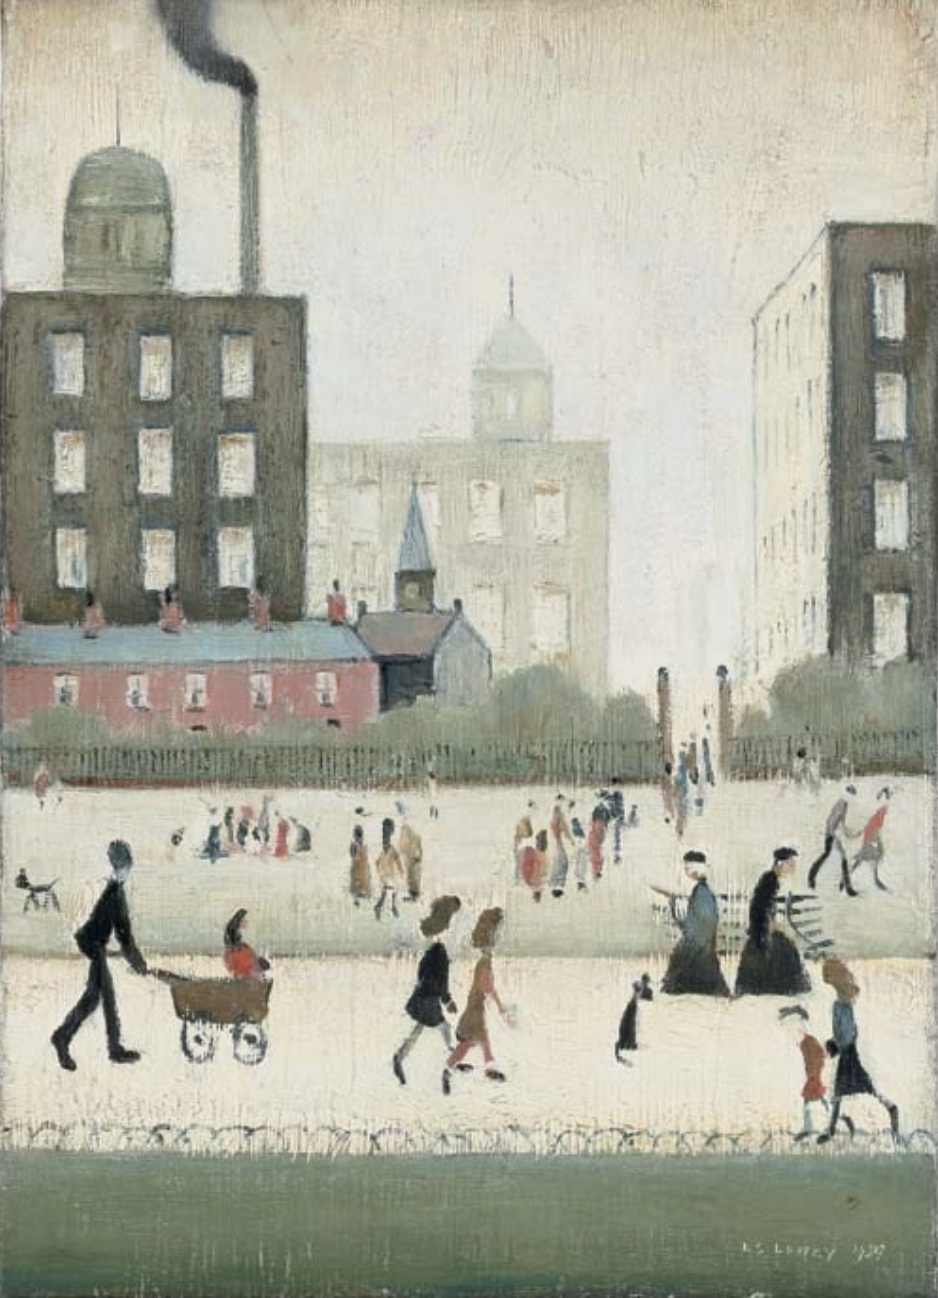 Sunday in the Park, Manchester (1959) by Laurence Stephen Lowry (1887 - 1976), English artist.